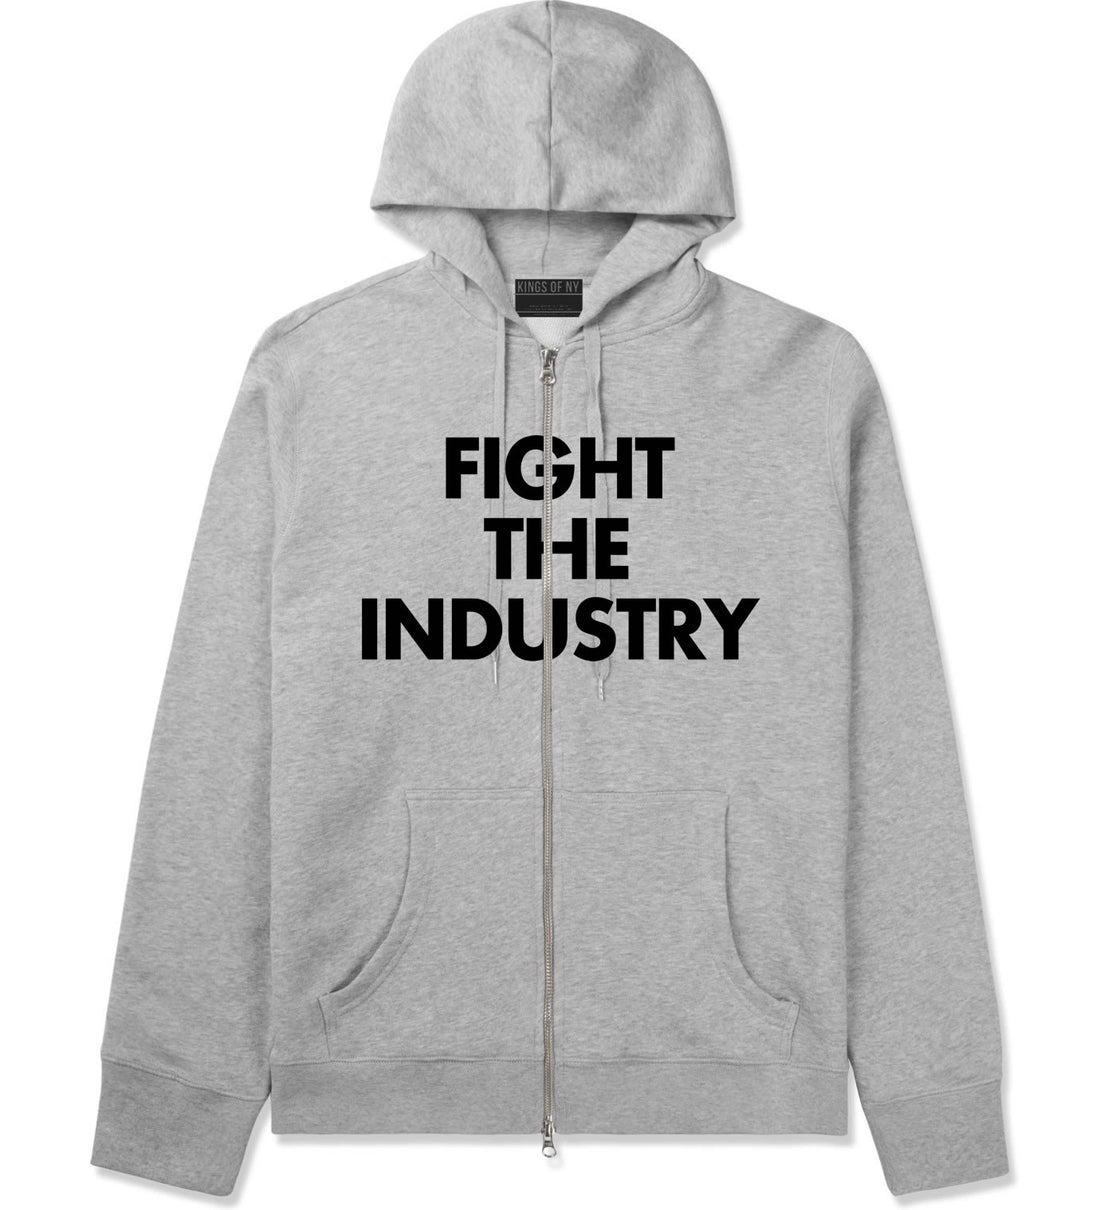 Fight The Industry Power Zip Up Hoodie in Grey By Kings Of NY